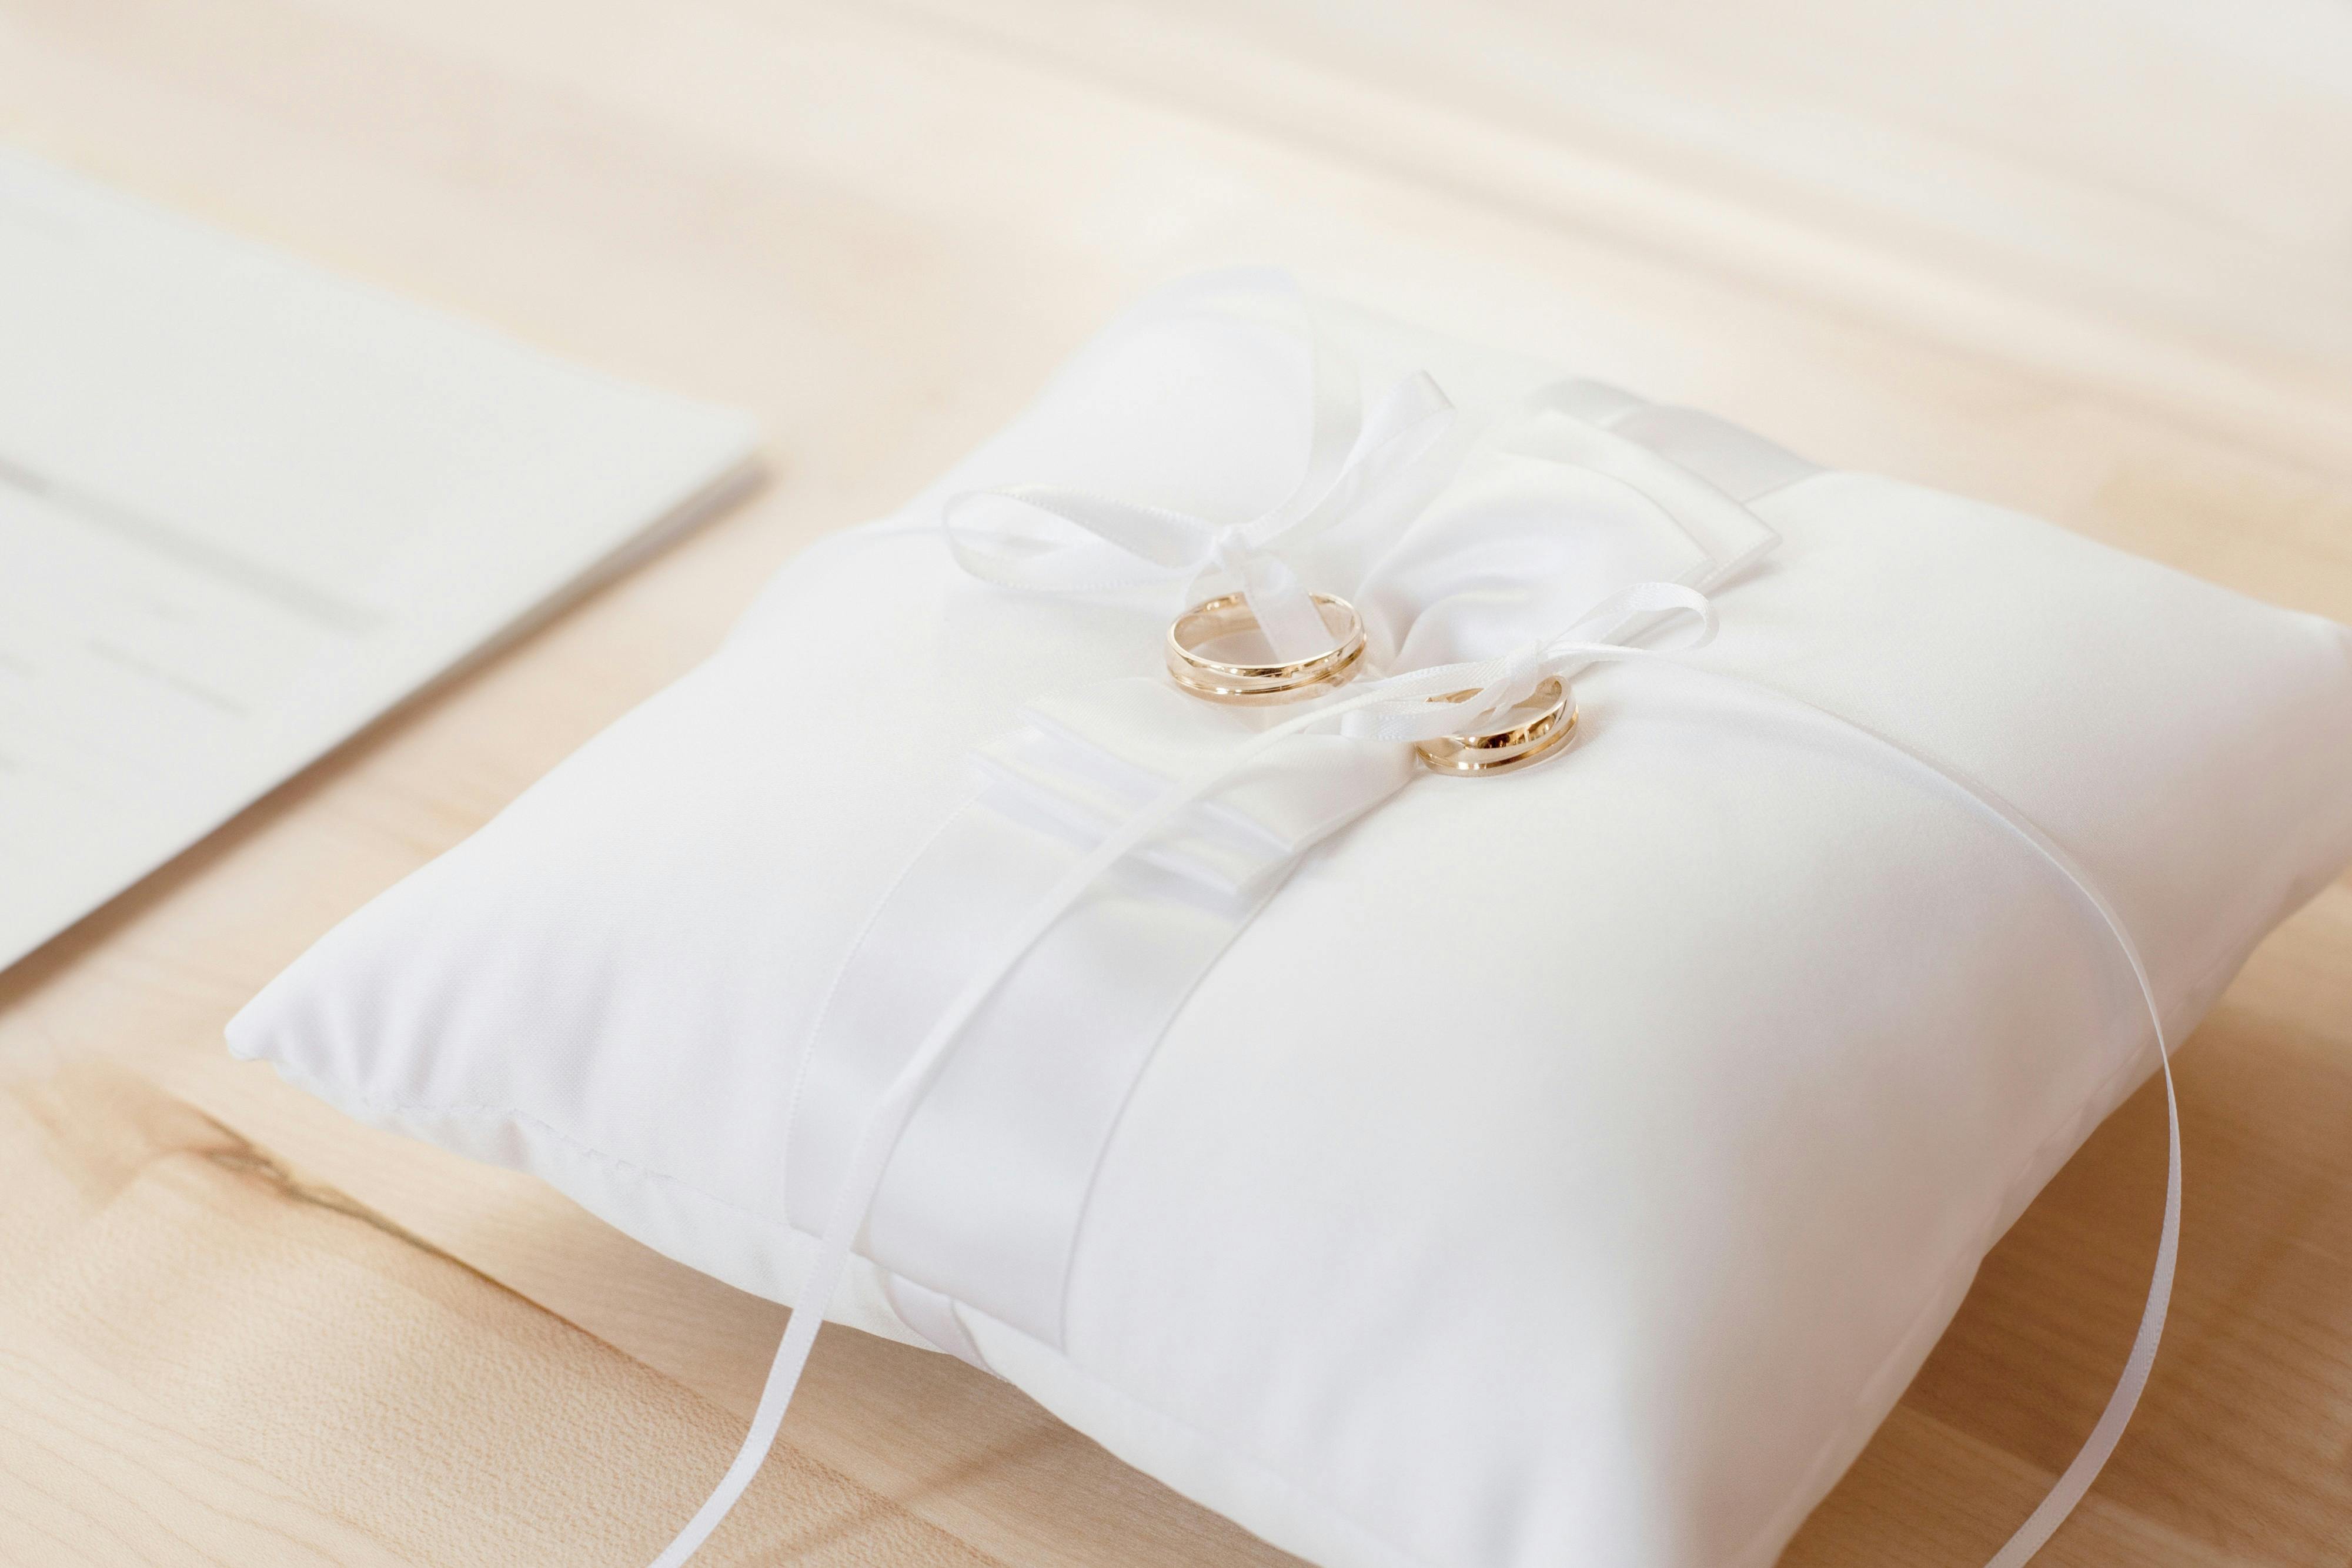 closeup photo of pair of gold bridal rings on top of white pillow